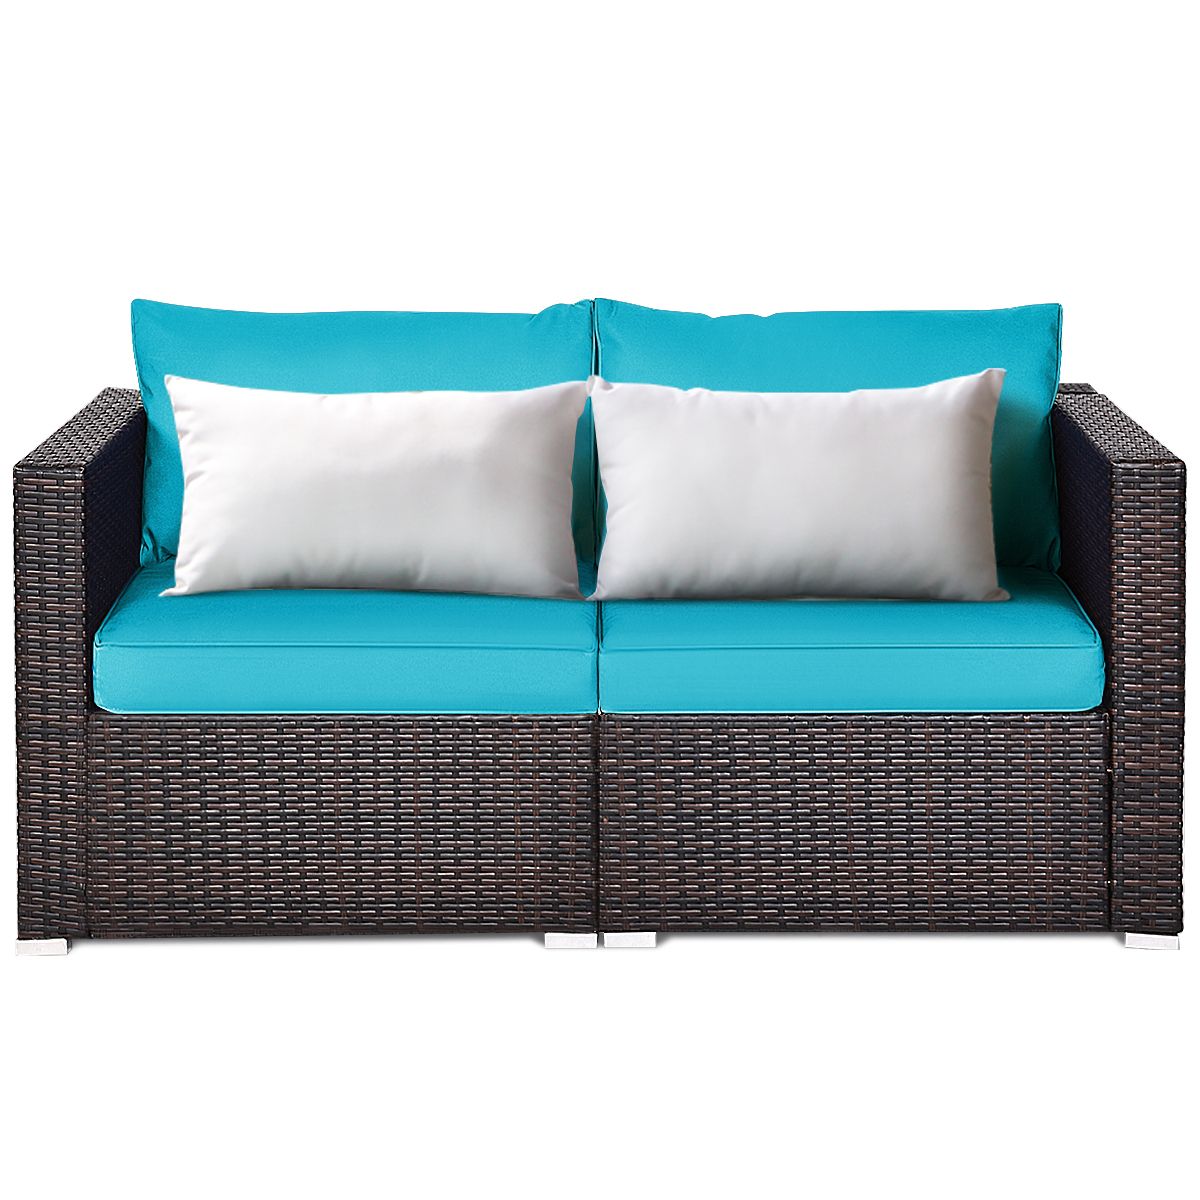 2 Piece Outdoor Wicker Sectional Sofa Sets In Widely Used Patiojoy 2 Piece Patio Wicker Corner Sofa Set Rattan Loveseat With (View 2 of 15)